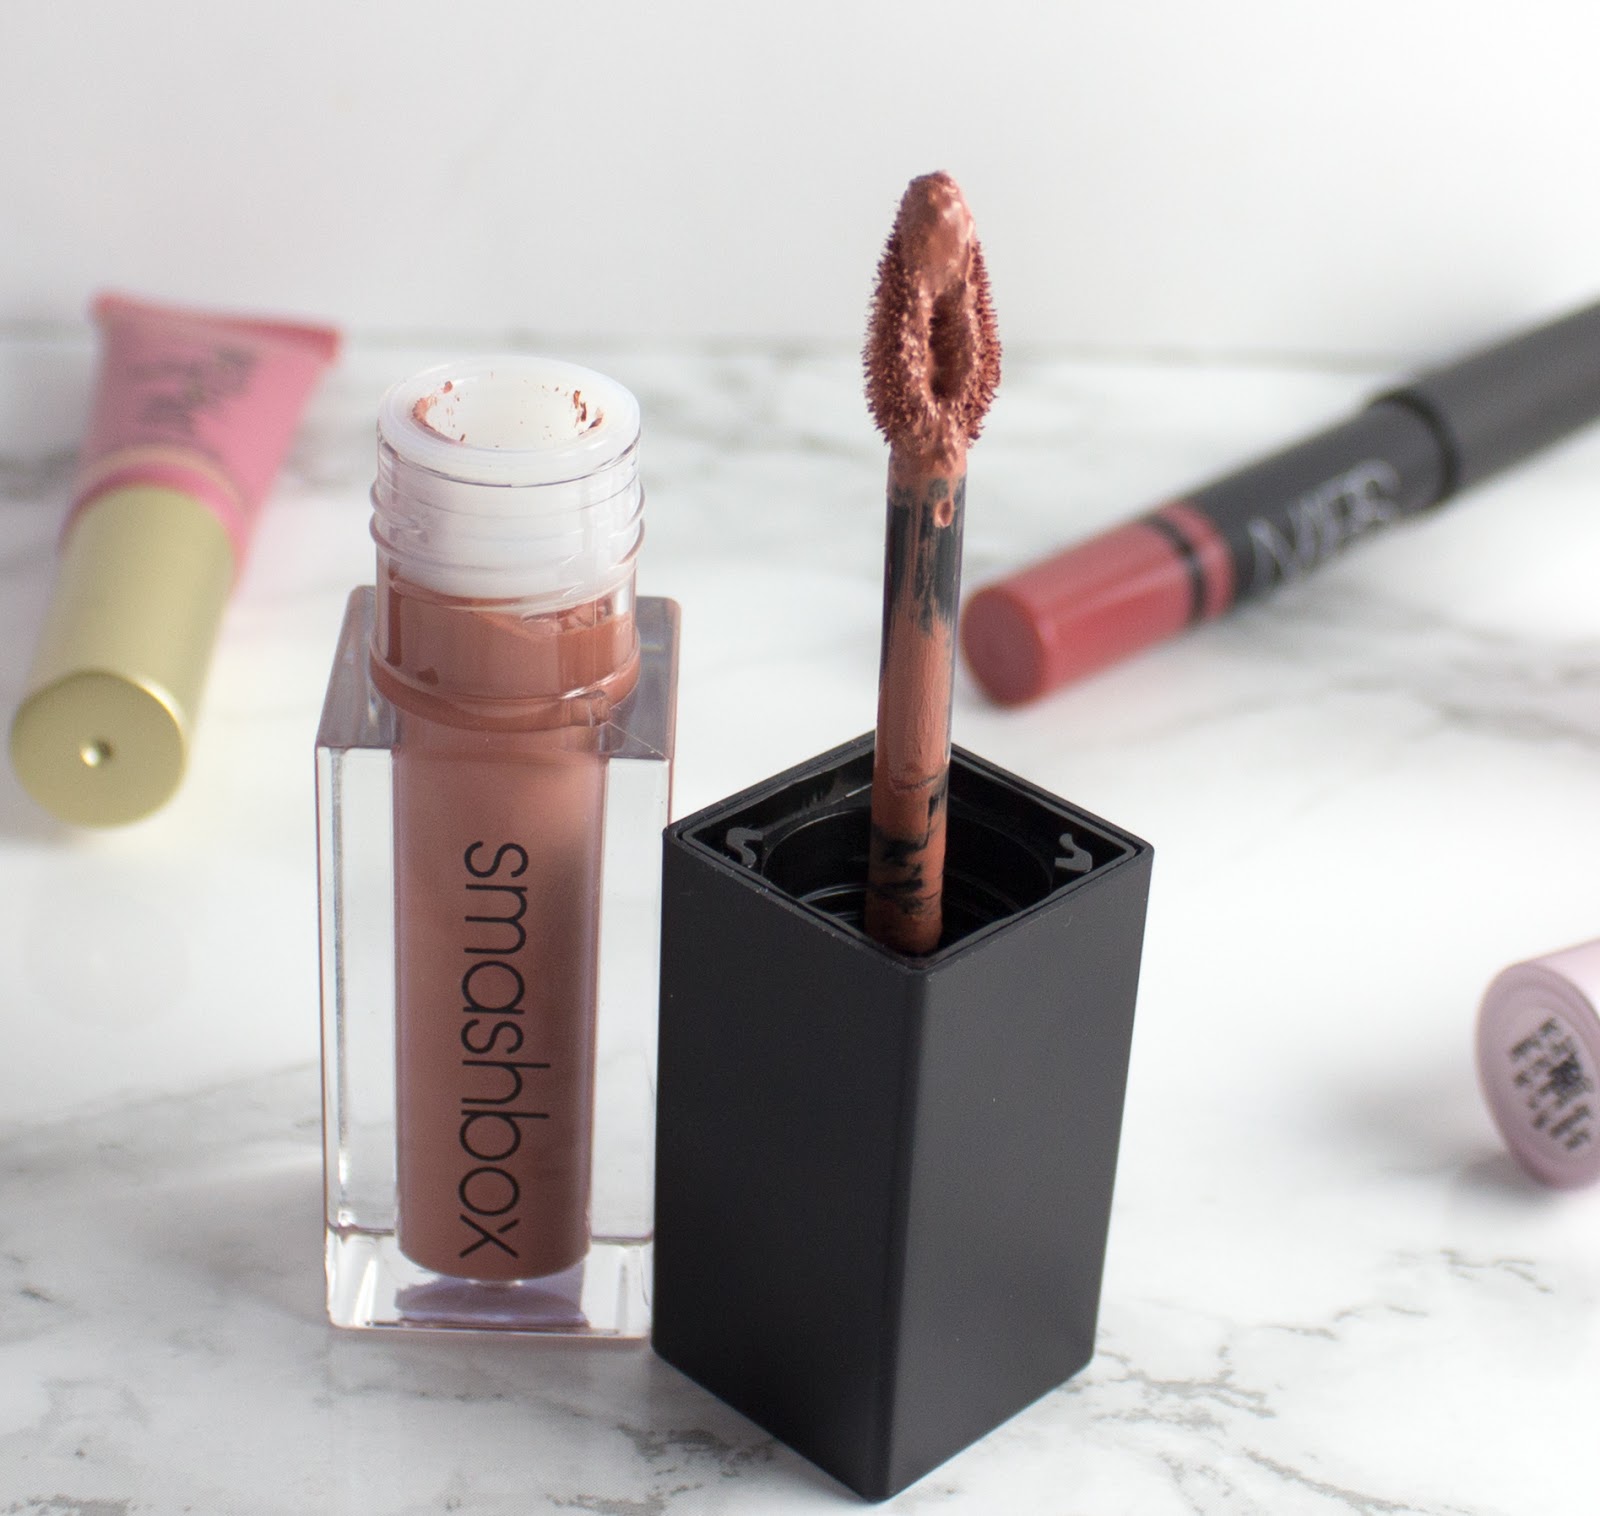 Smashbox Always On Liquid Lipstick in Stepping Out Swatch and Review